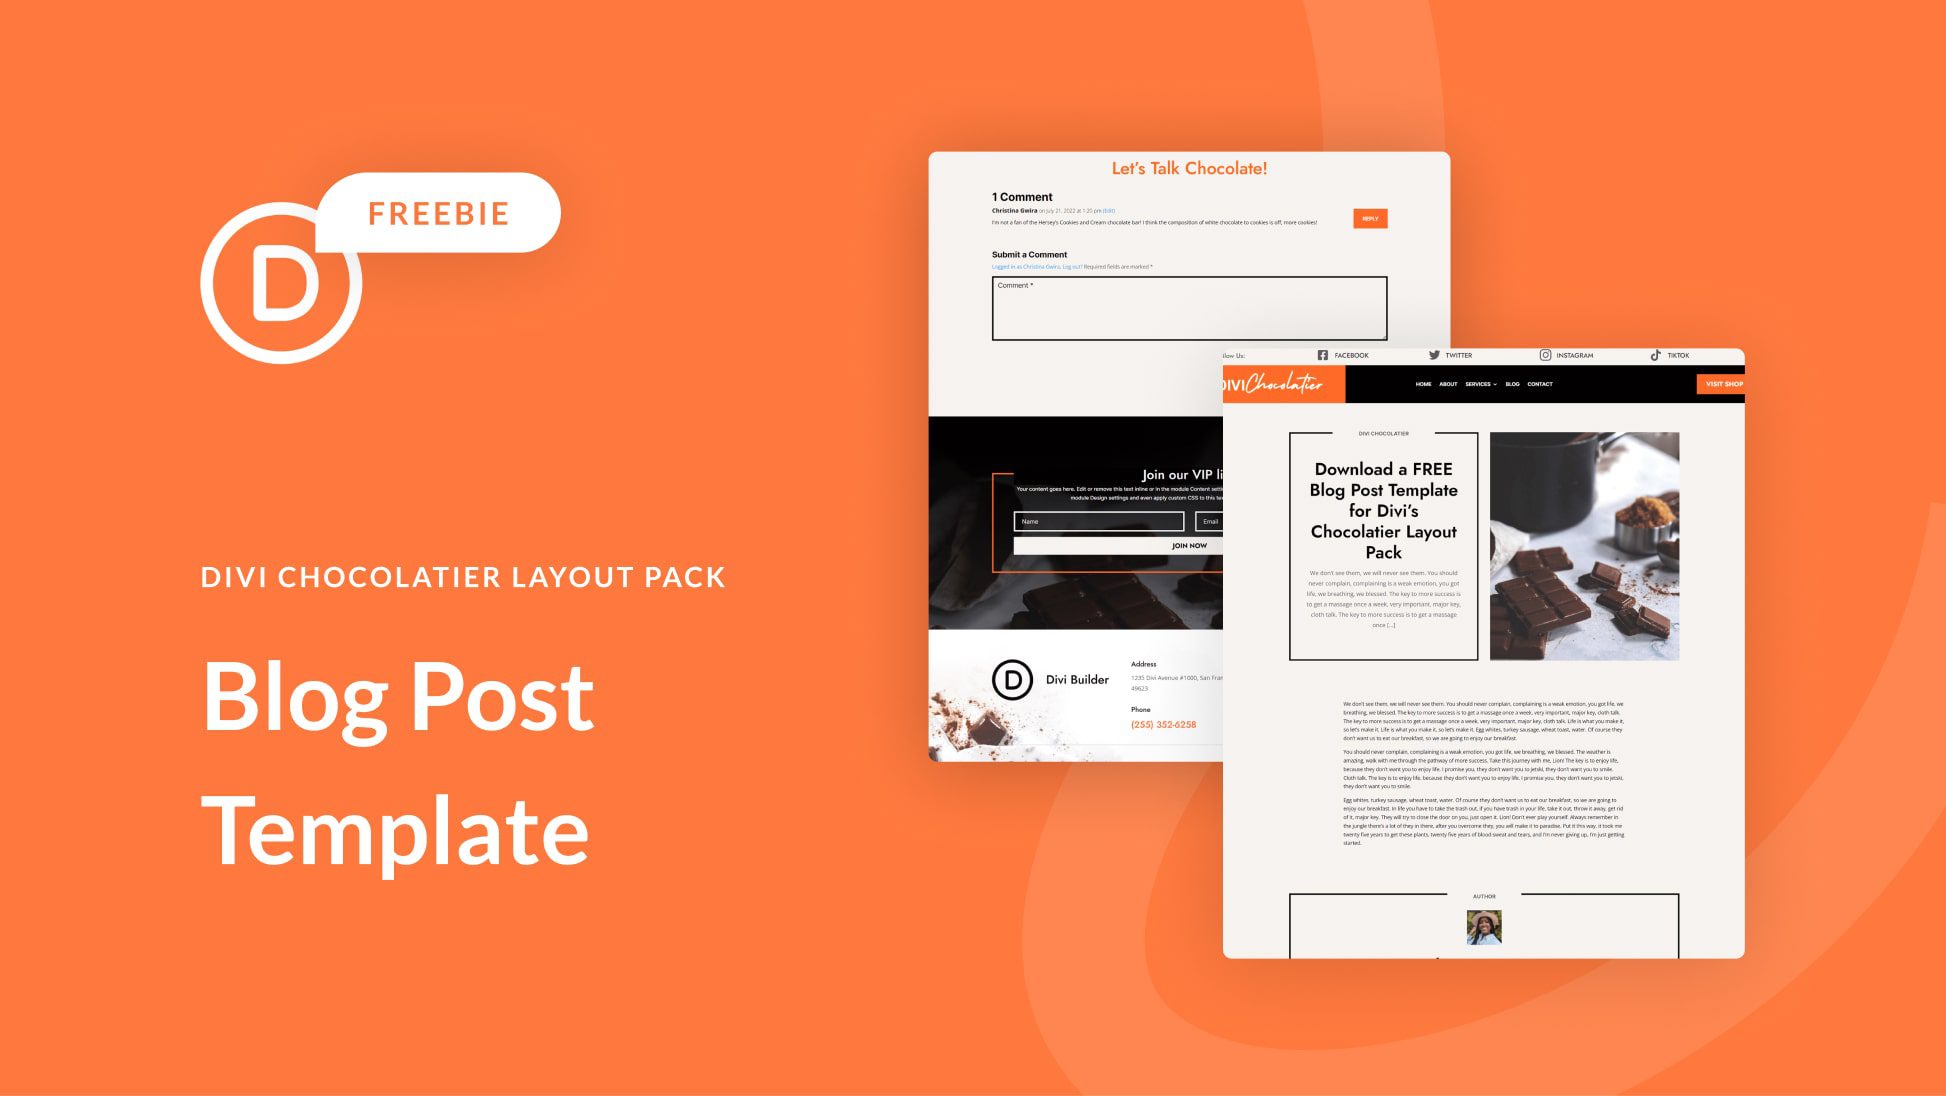 Download a FREE Blog Post Template for Divi’s Chocolatier Layout Pack